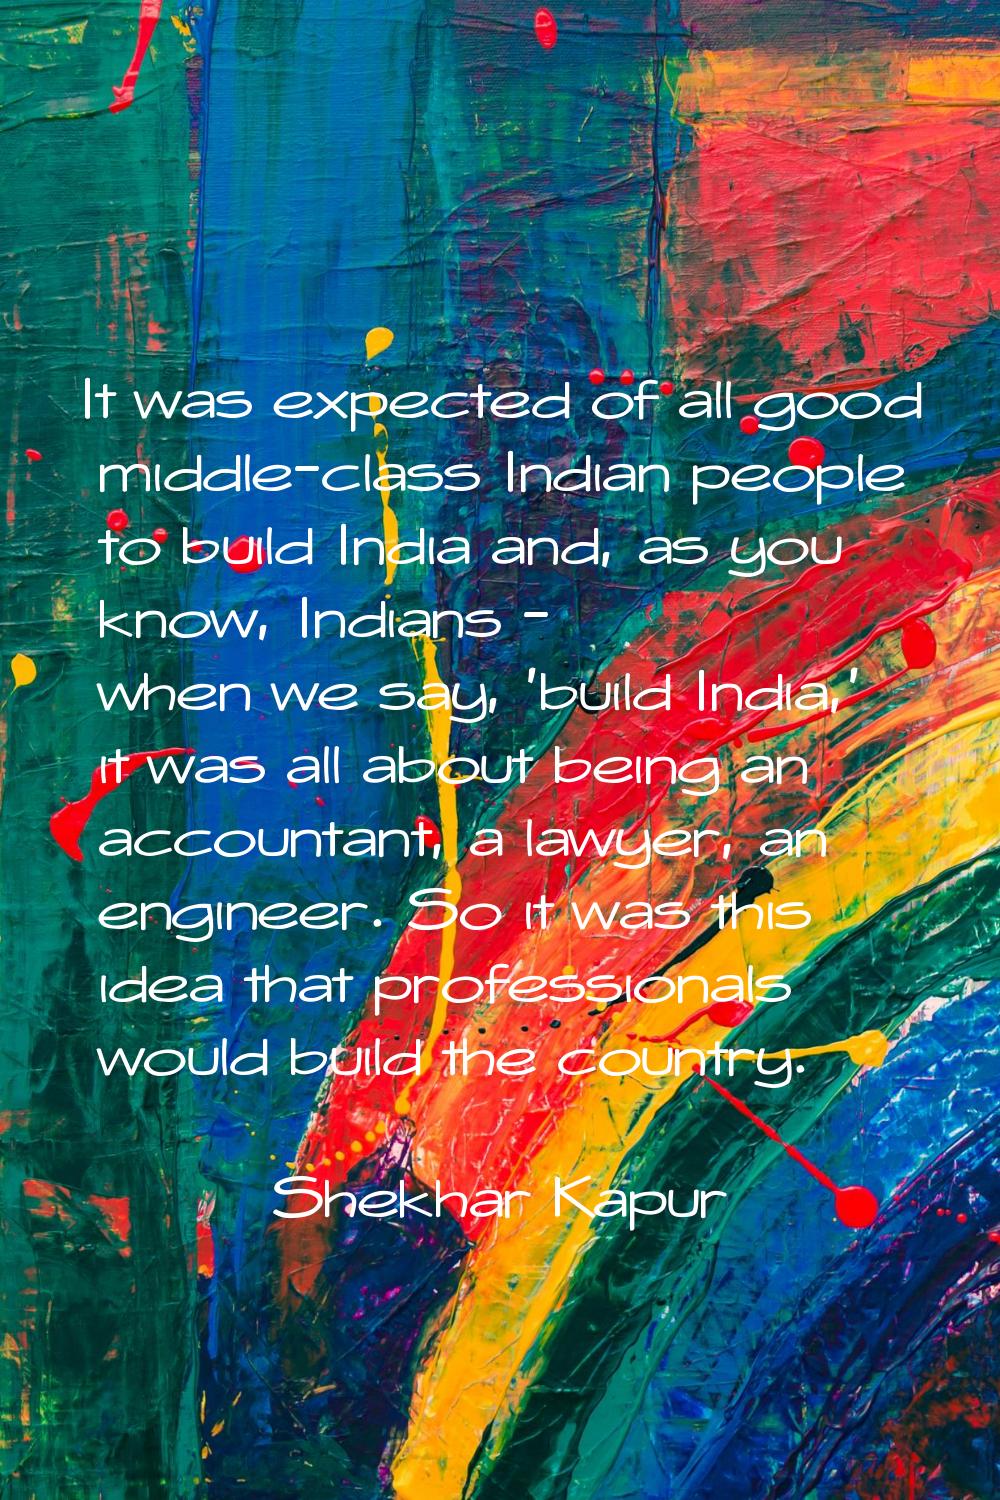 It was expected of all good middle-class Indian people to build India and, as you know, Indians - w